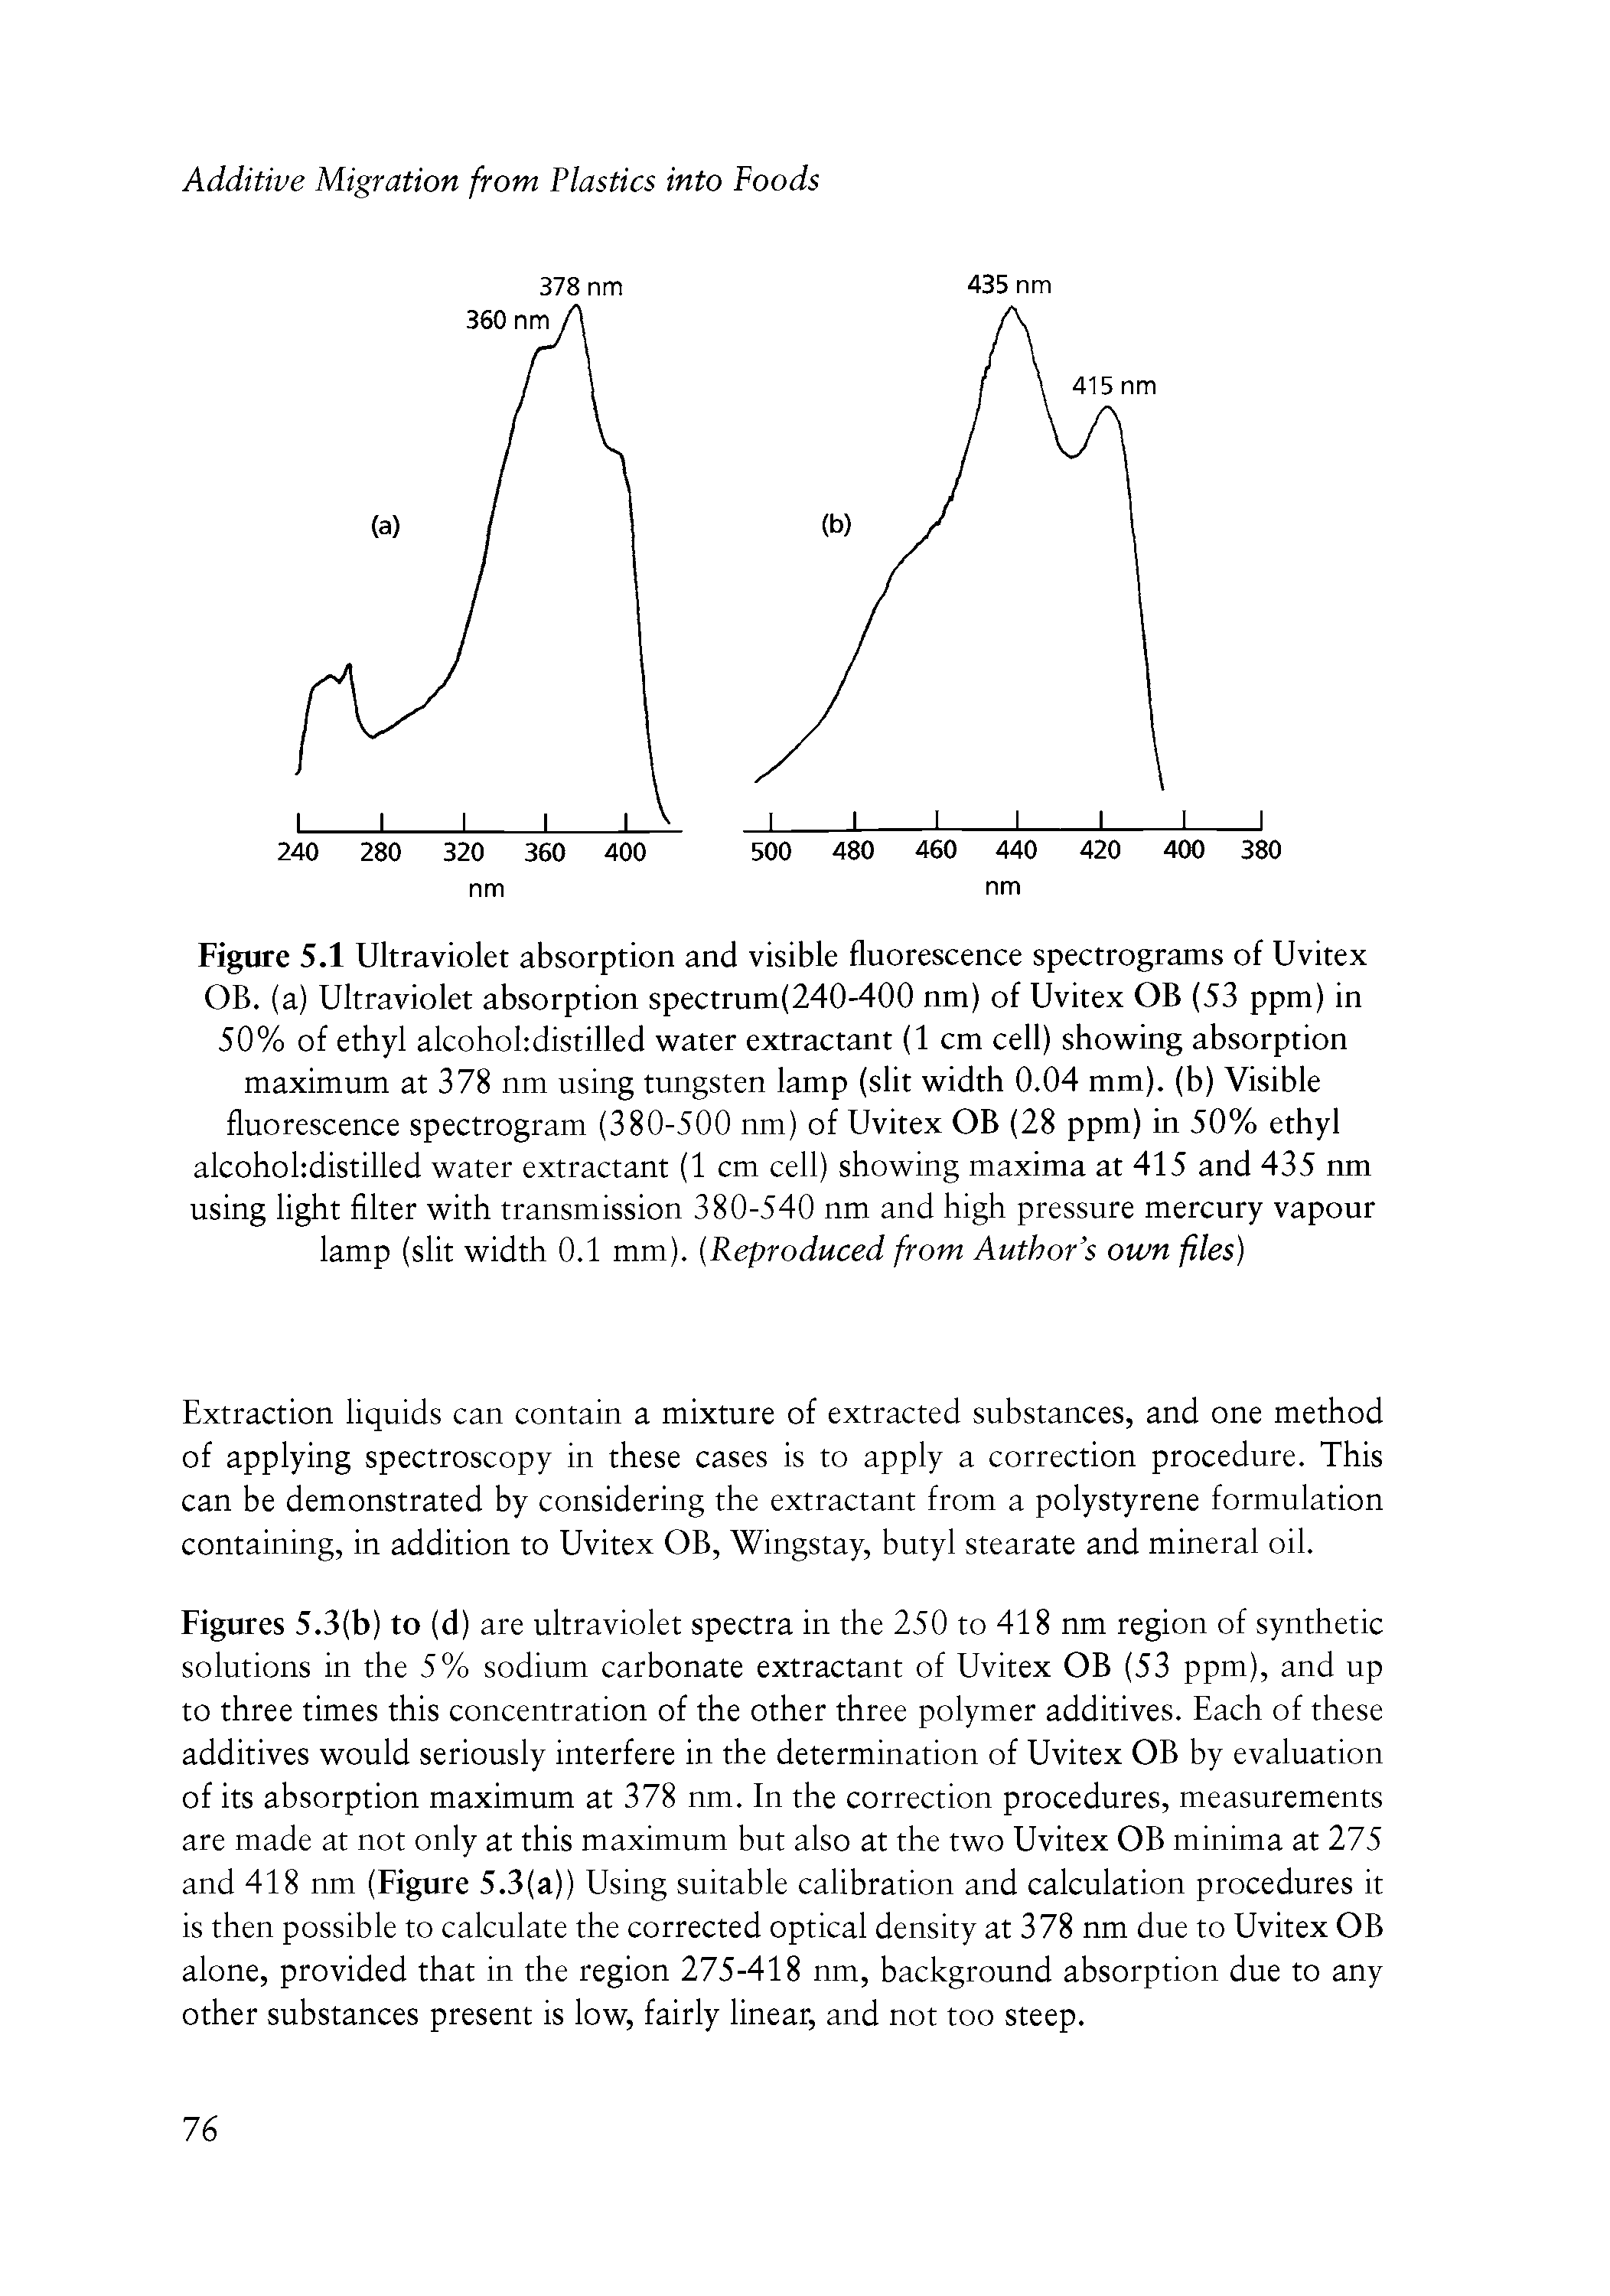 Figures 5.3(b) to (d) are ultraviolet spectra in the 250 to 418 nm region of synthetic solutions in the 5% sodium carbonate extractant of Uvitex OB (53 ppm), and up to three times this concentration of the other three polymer additives. Each of these additives would seriously interfere in the determination of Uvitex OB by evaluation of its absorption maximum at 378 nm. In the correction procedures, measurements are made at not only at this maximum but also at the two Uvitex OB minima at 275 and 418 nm (Figure 5.3(a)) Using suitable calibration and calculation procedures it is then possible to calculate the corrected optical density at 378 nm due to Uvitex OB alone, provided that in the region 275-418 nm, background absorption due to any other substances present is low, fairly linear, and not too steep.